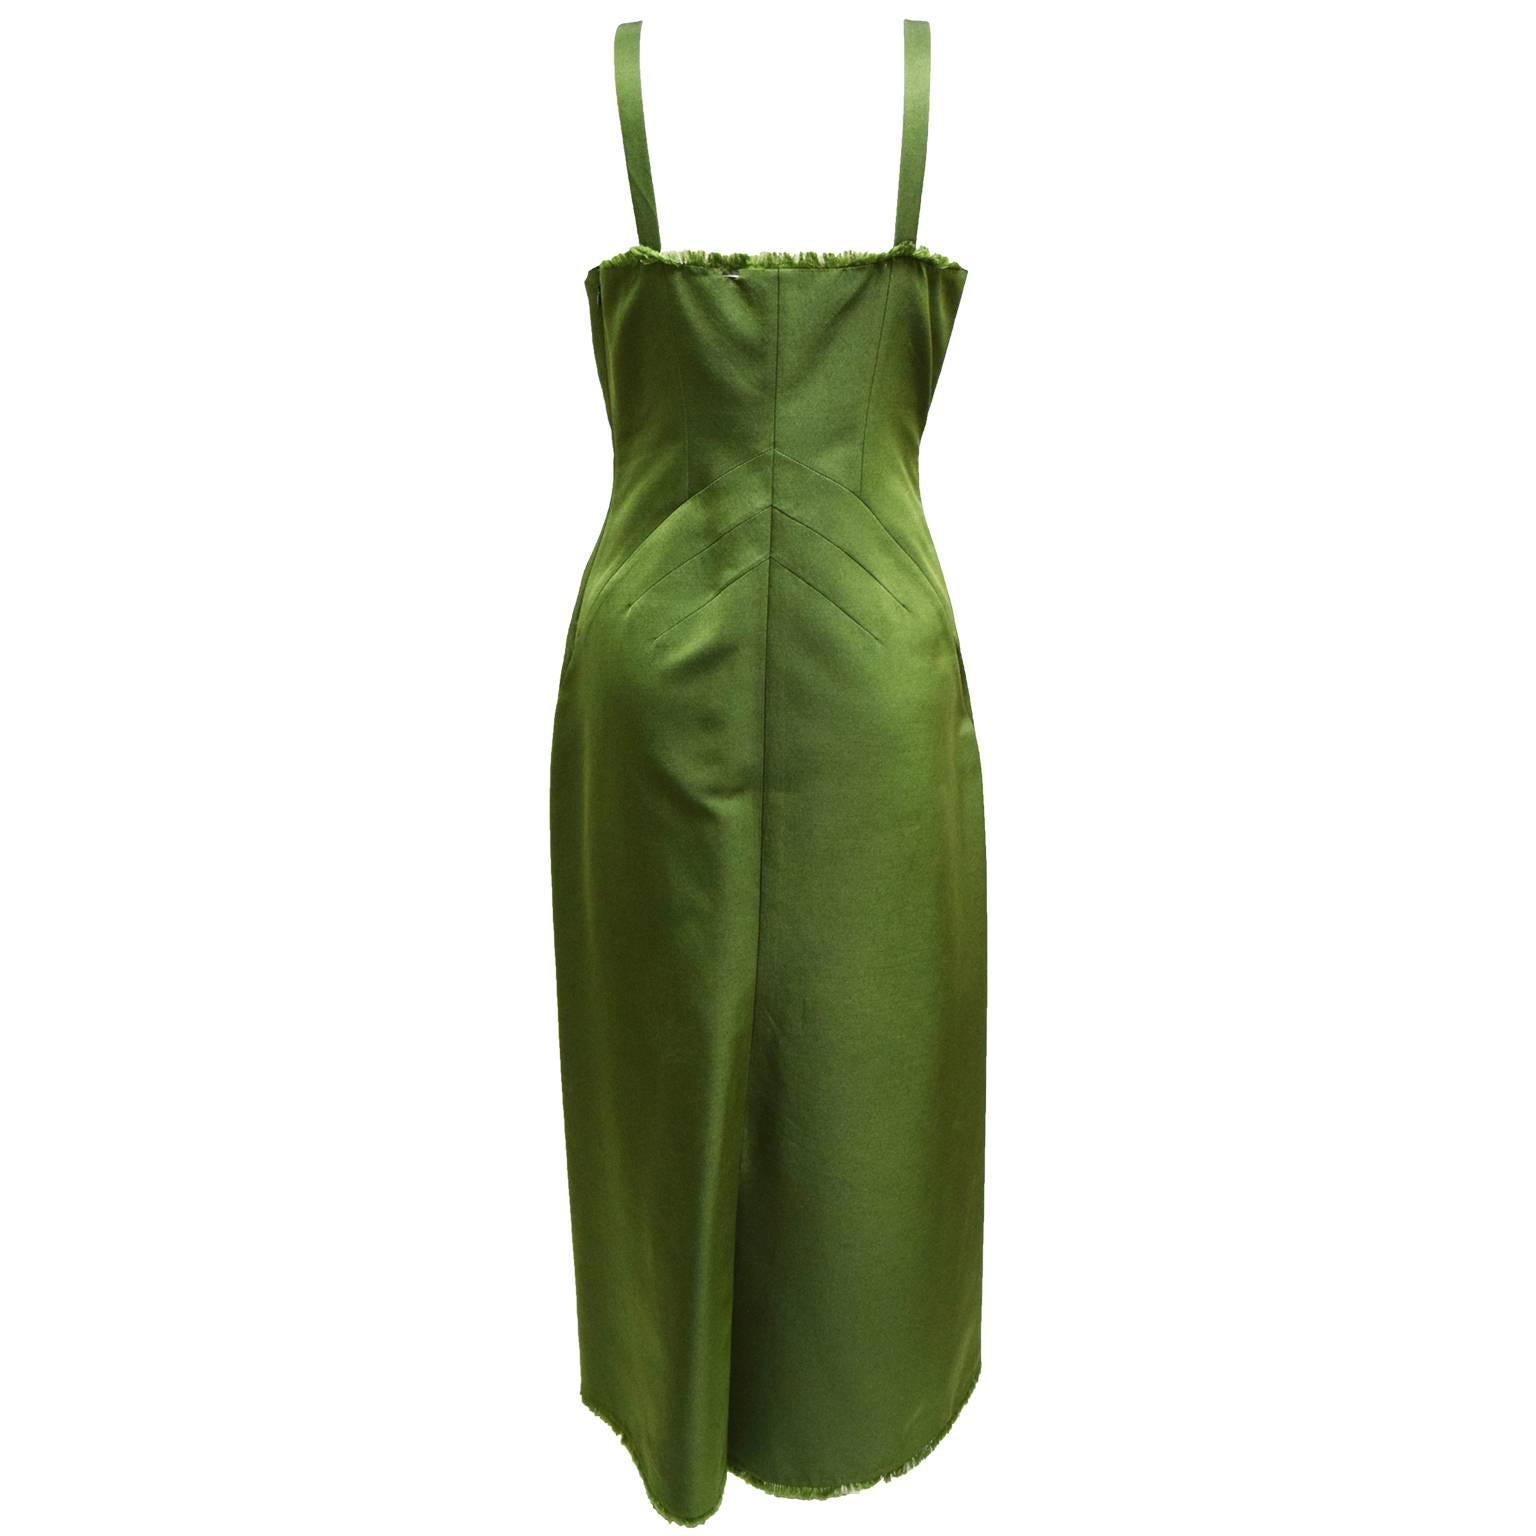 This Alberta Ferretti cocktail dress is made of a cotton silk blend and is a rich olive color. The ends of the dress are fringed an the dress has slimming darts down the dress creating an hour glass shape.  